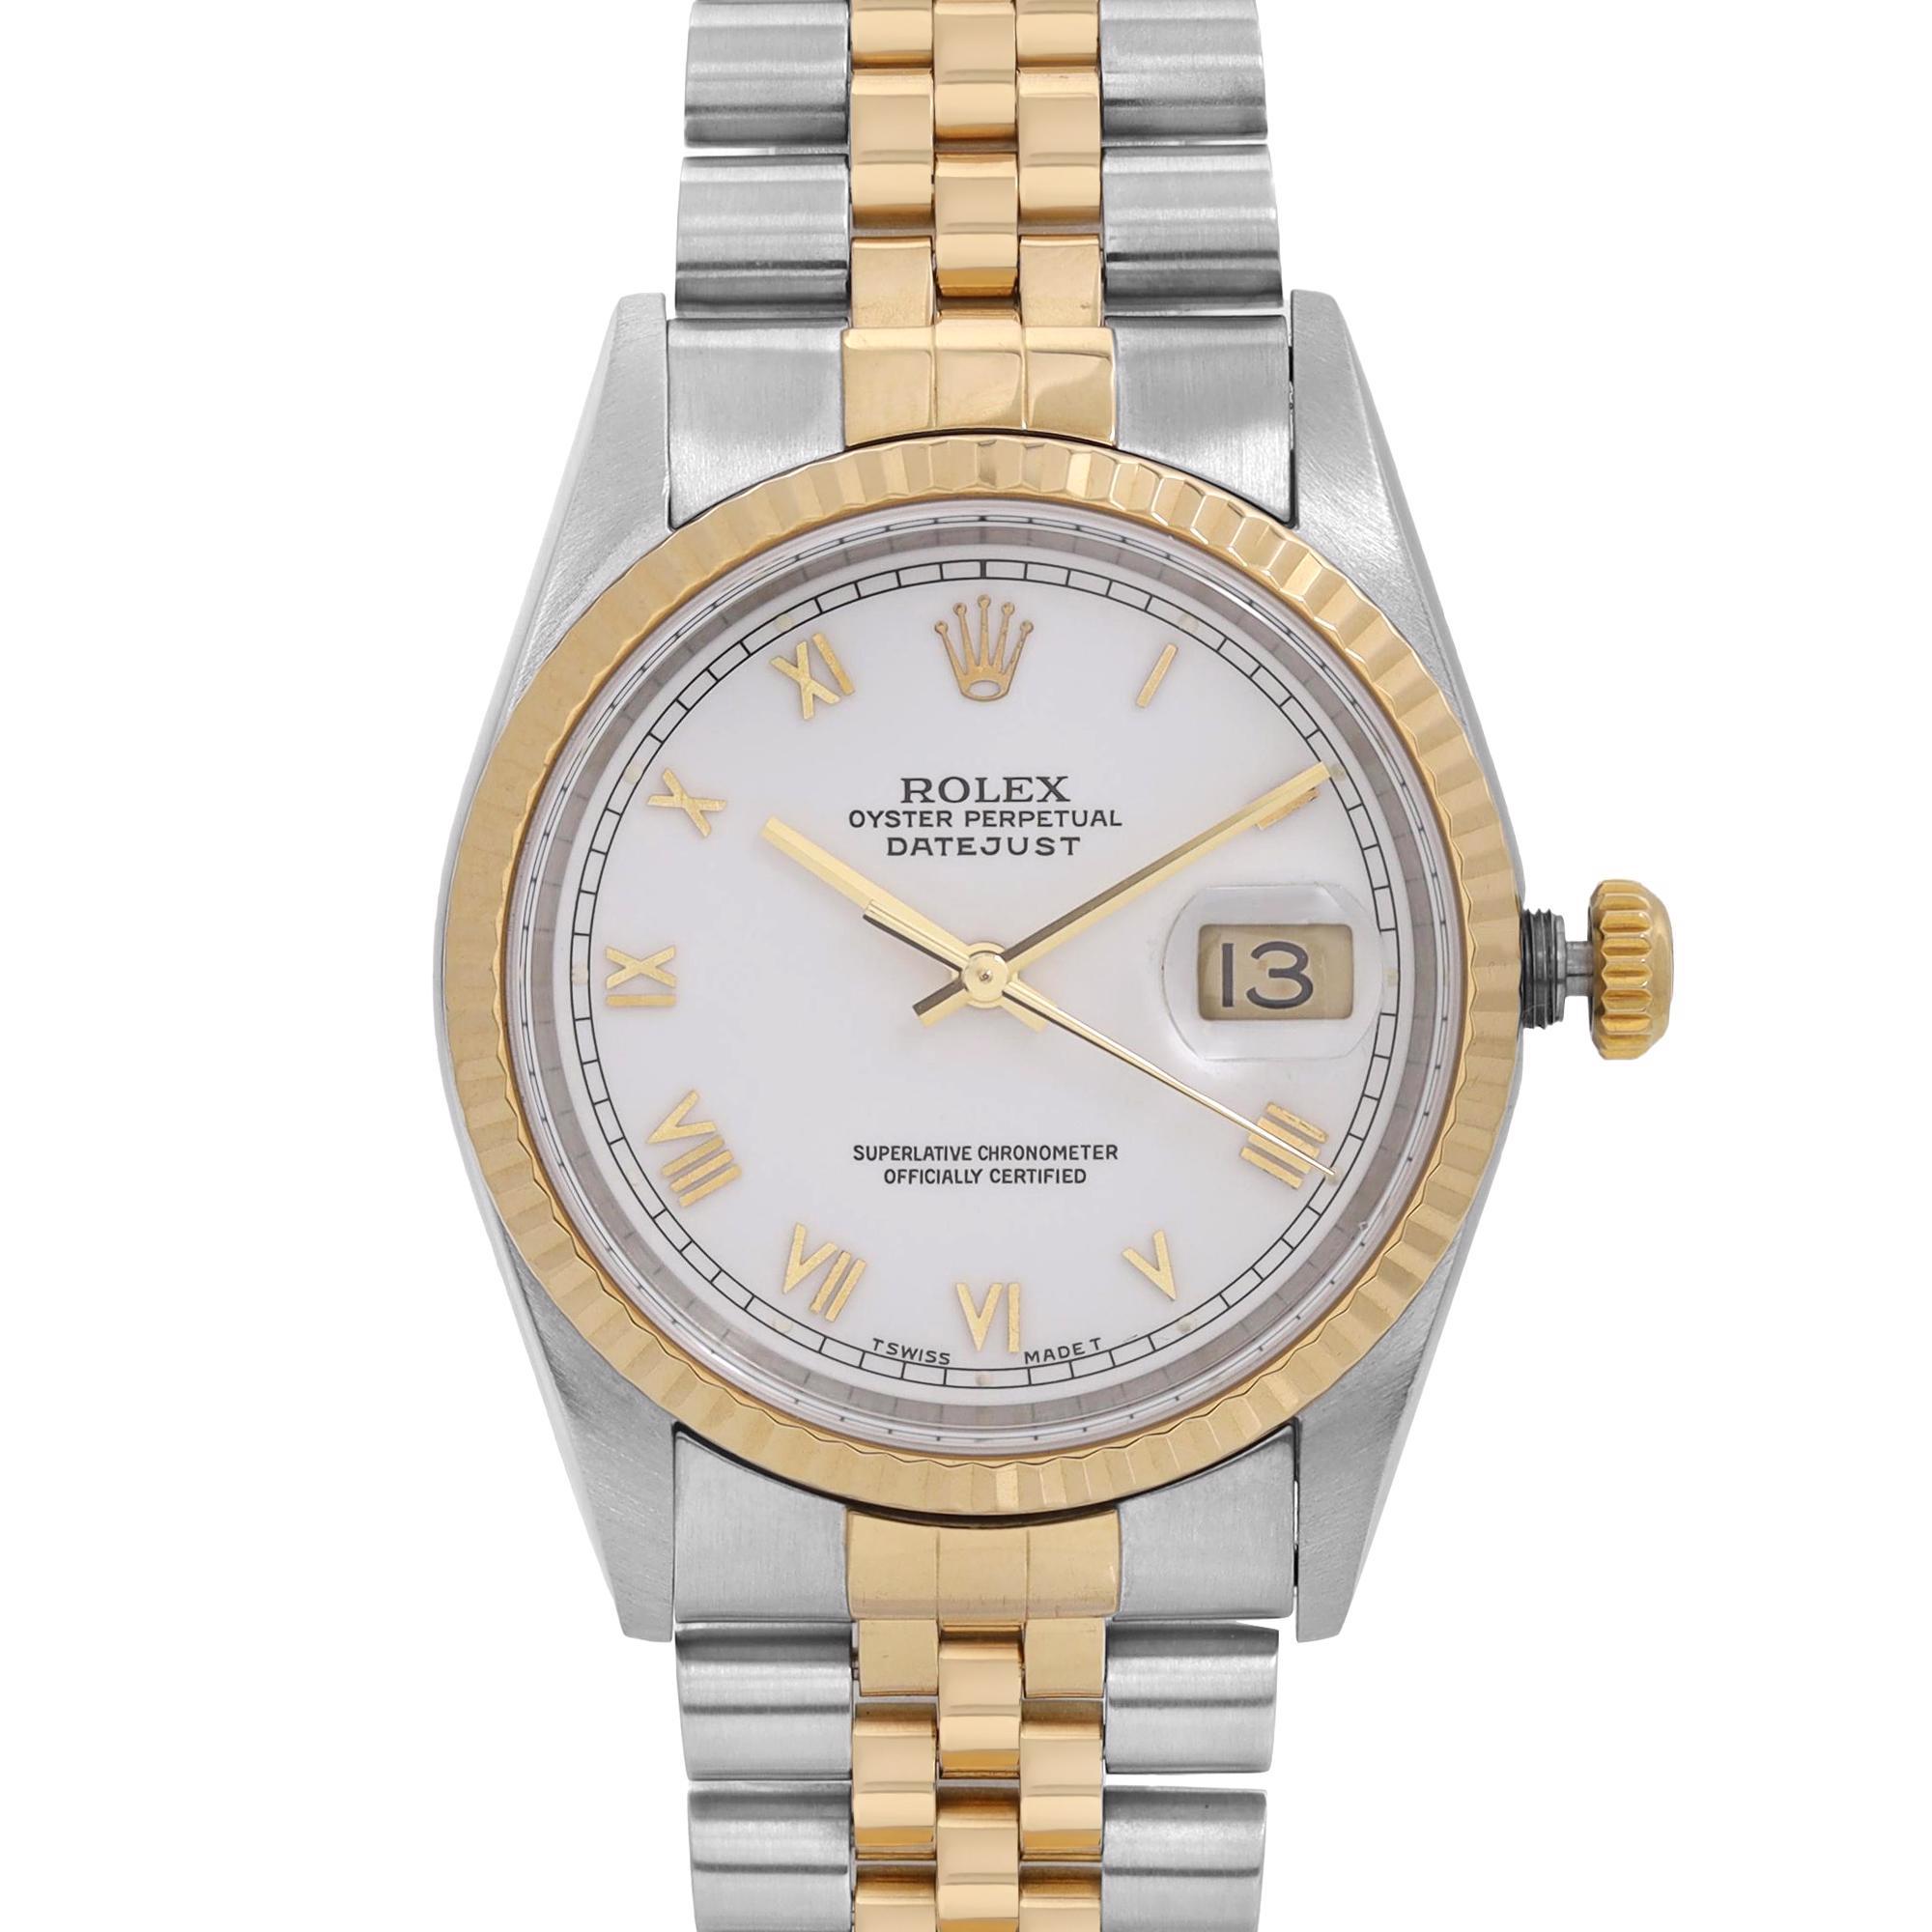 Pre-owned Rolex Datejust 36mm No Holes 18k yellow Gold Steel Jubilee Bracelet Gray Dial Automatic Watch 16233. Minor Slack, Minor Oxidation on the Hour Markers As Seen In Photos. Minor slack on the band. The watch was Produced in 2000 Features